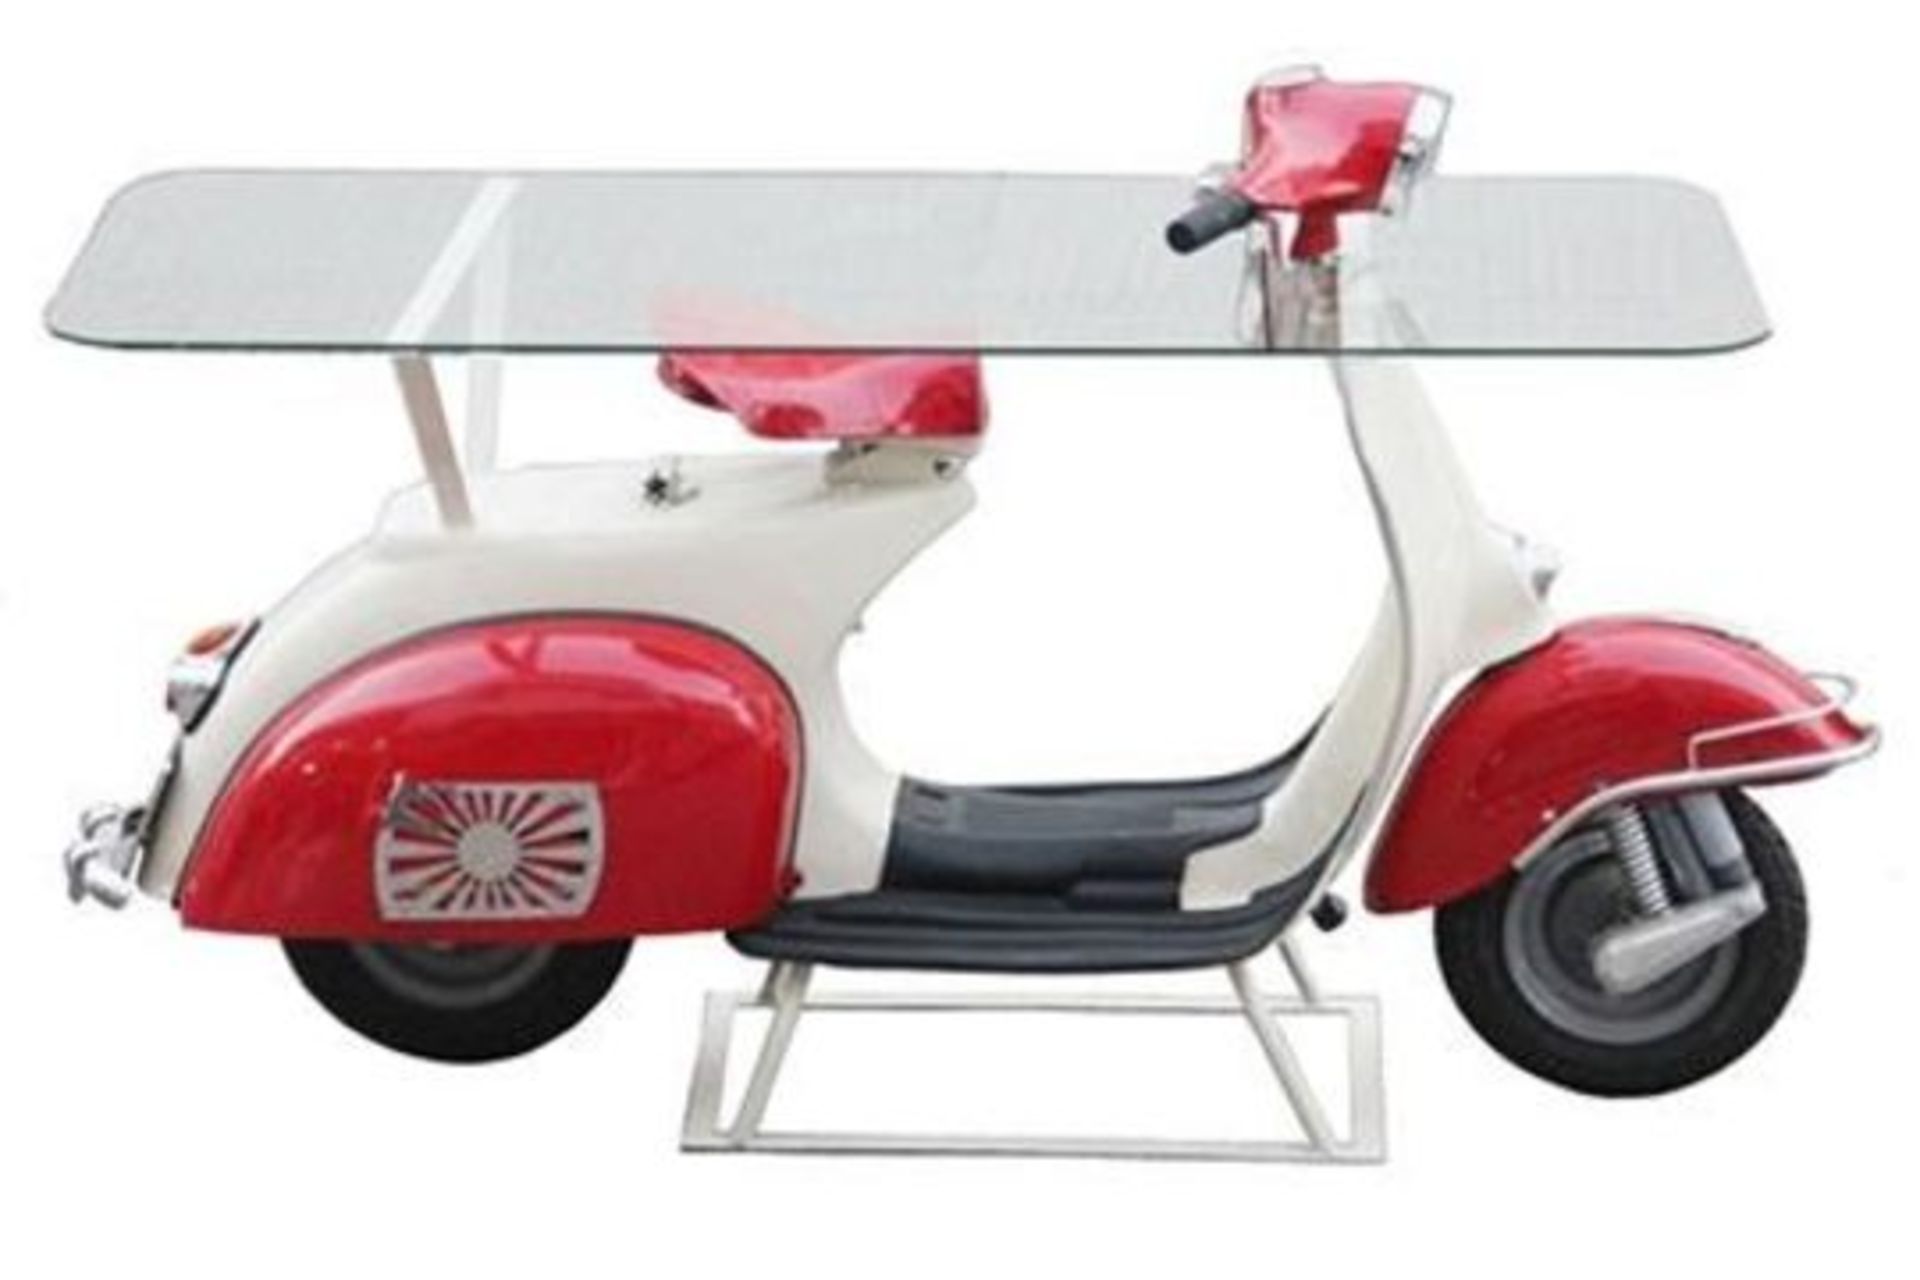 VINTAGE VESPA 150 SCOOTER GLASS TOP TABLE - Image 12 of 15